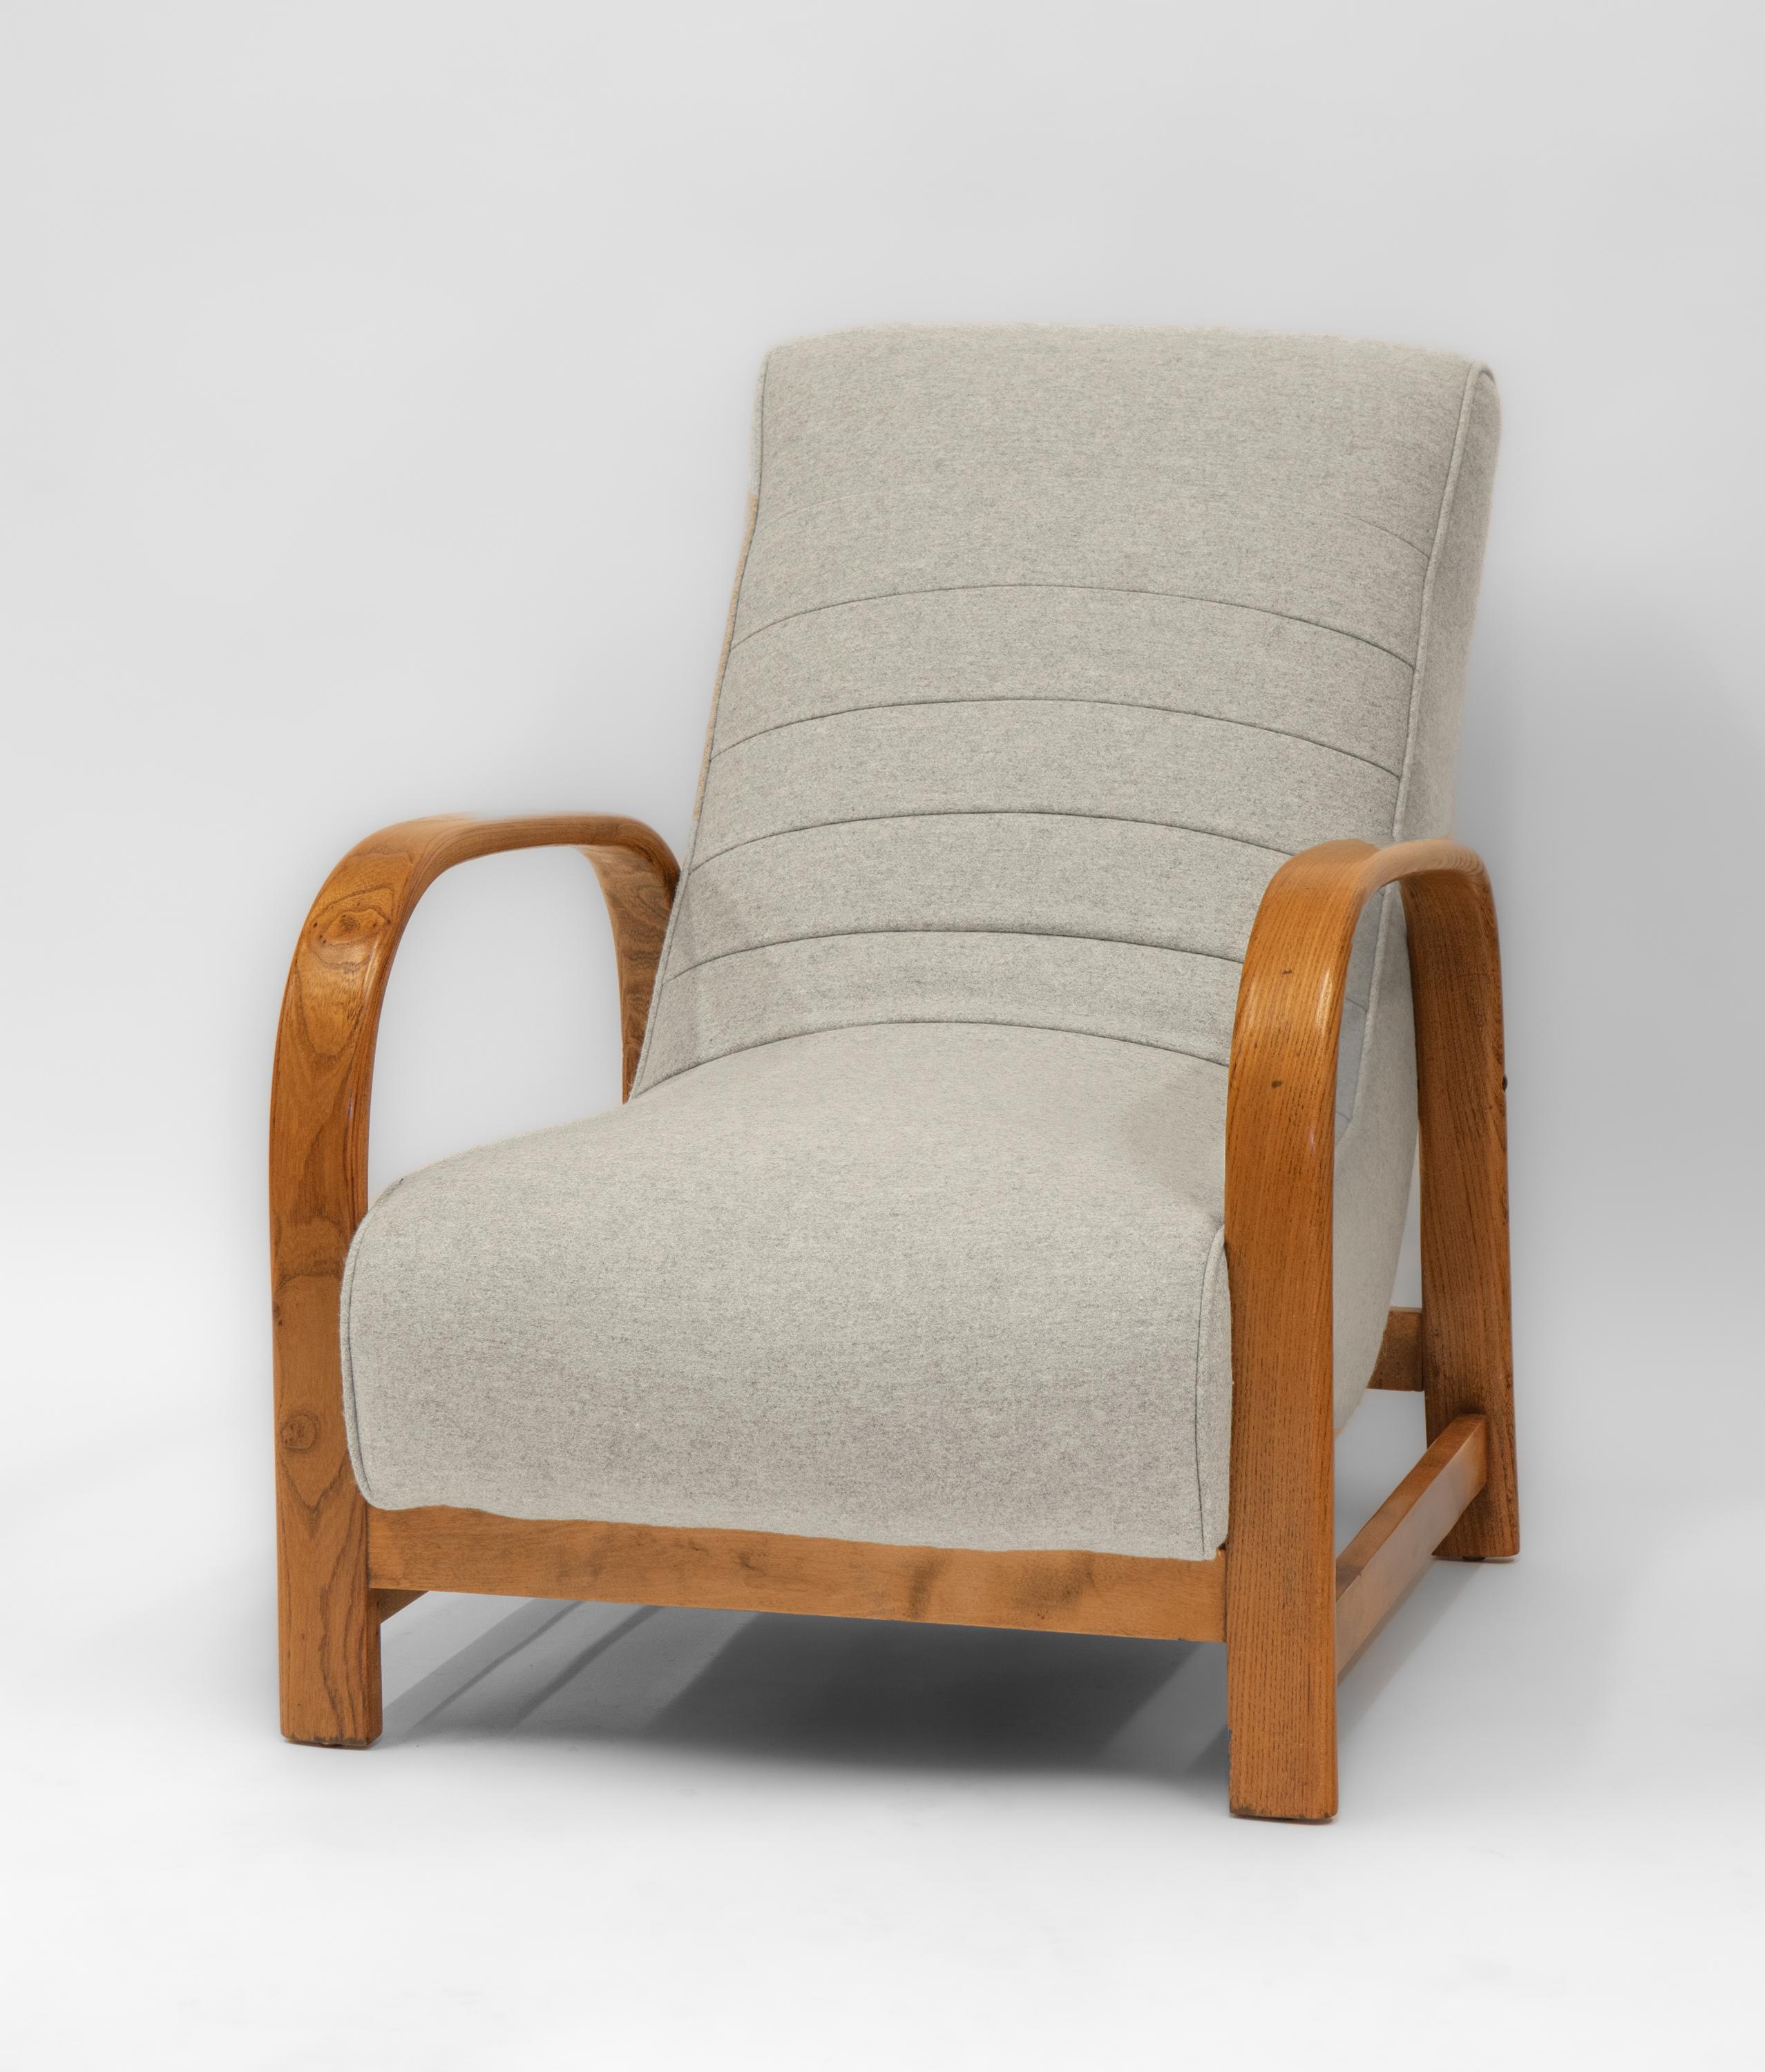 
A stylish Art Deco elm bentwood and beechwood framed lounge chair with Bute light grey wool upholstery. Circa 1930's.

Delivery is INCLUDED in the price for all areas in MAINLAND England & Wales. 

The bentwood arms show wonderful figuring to the